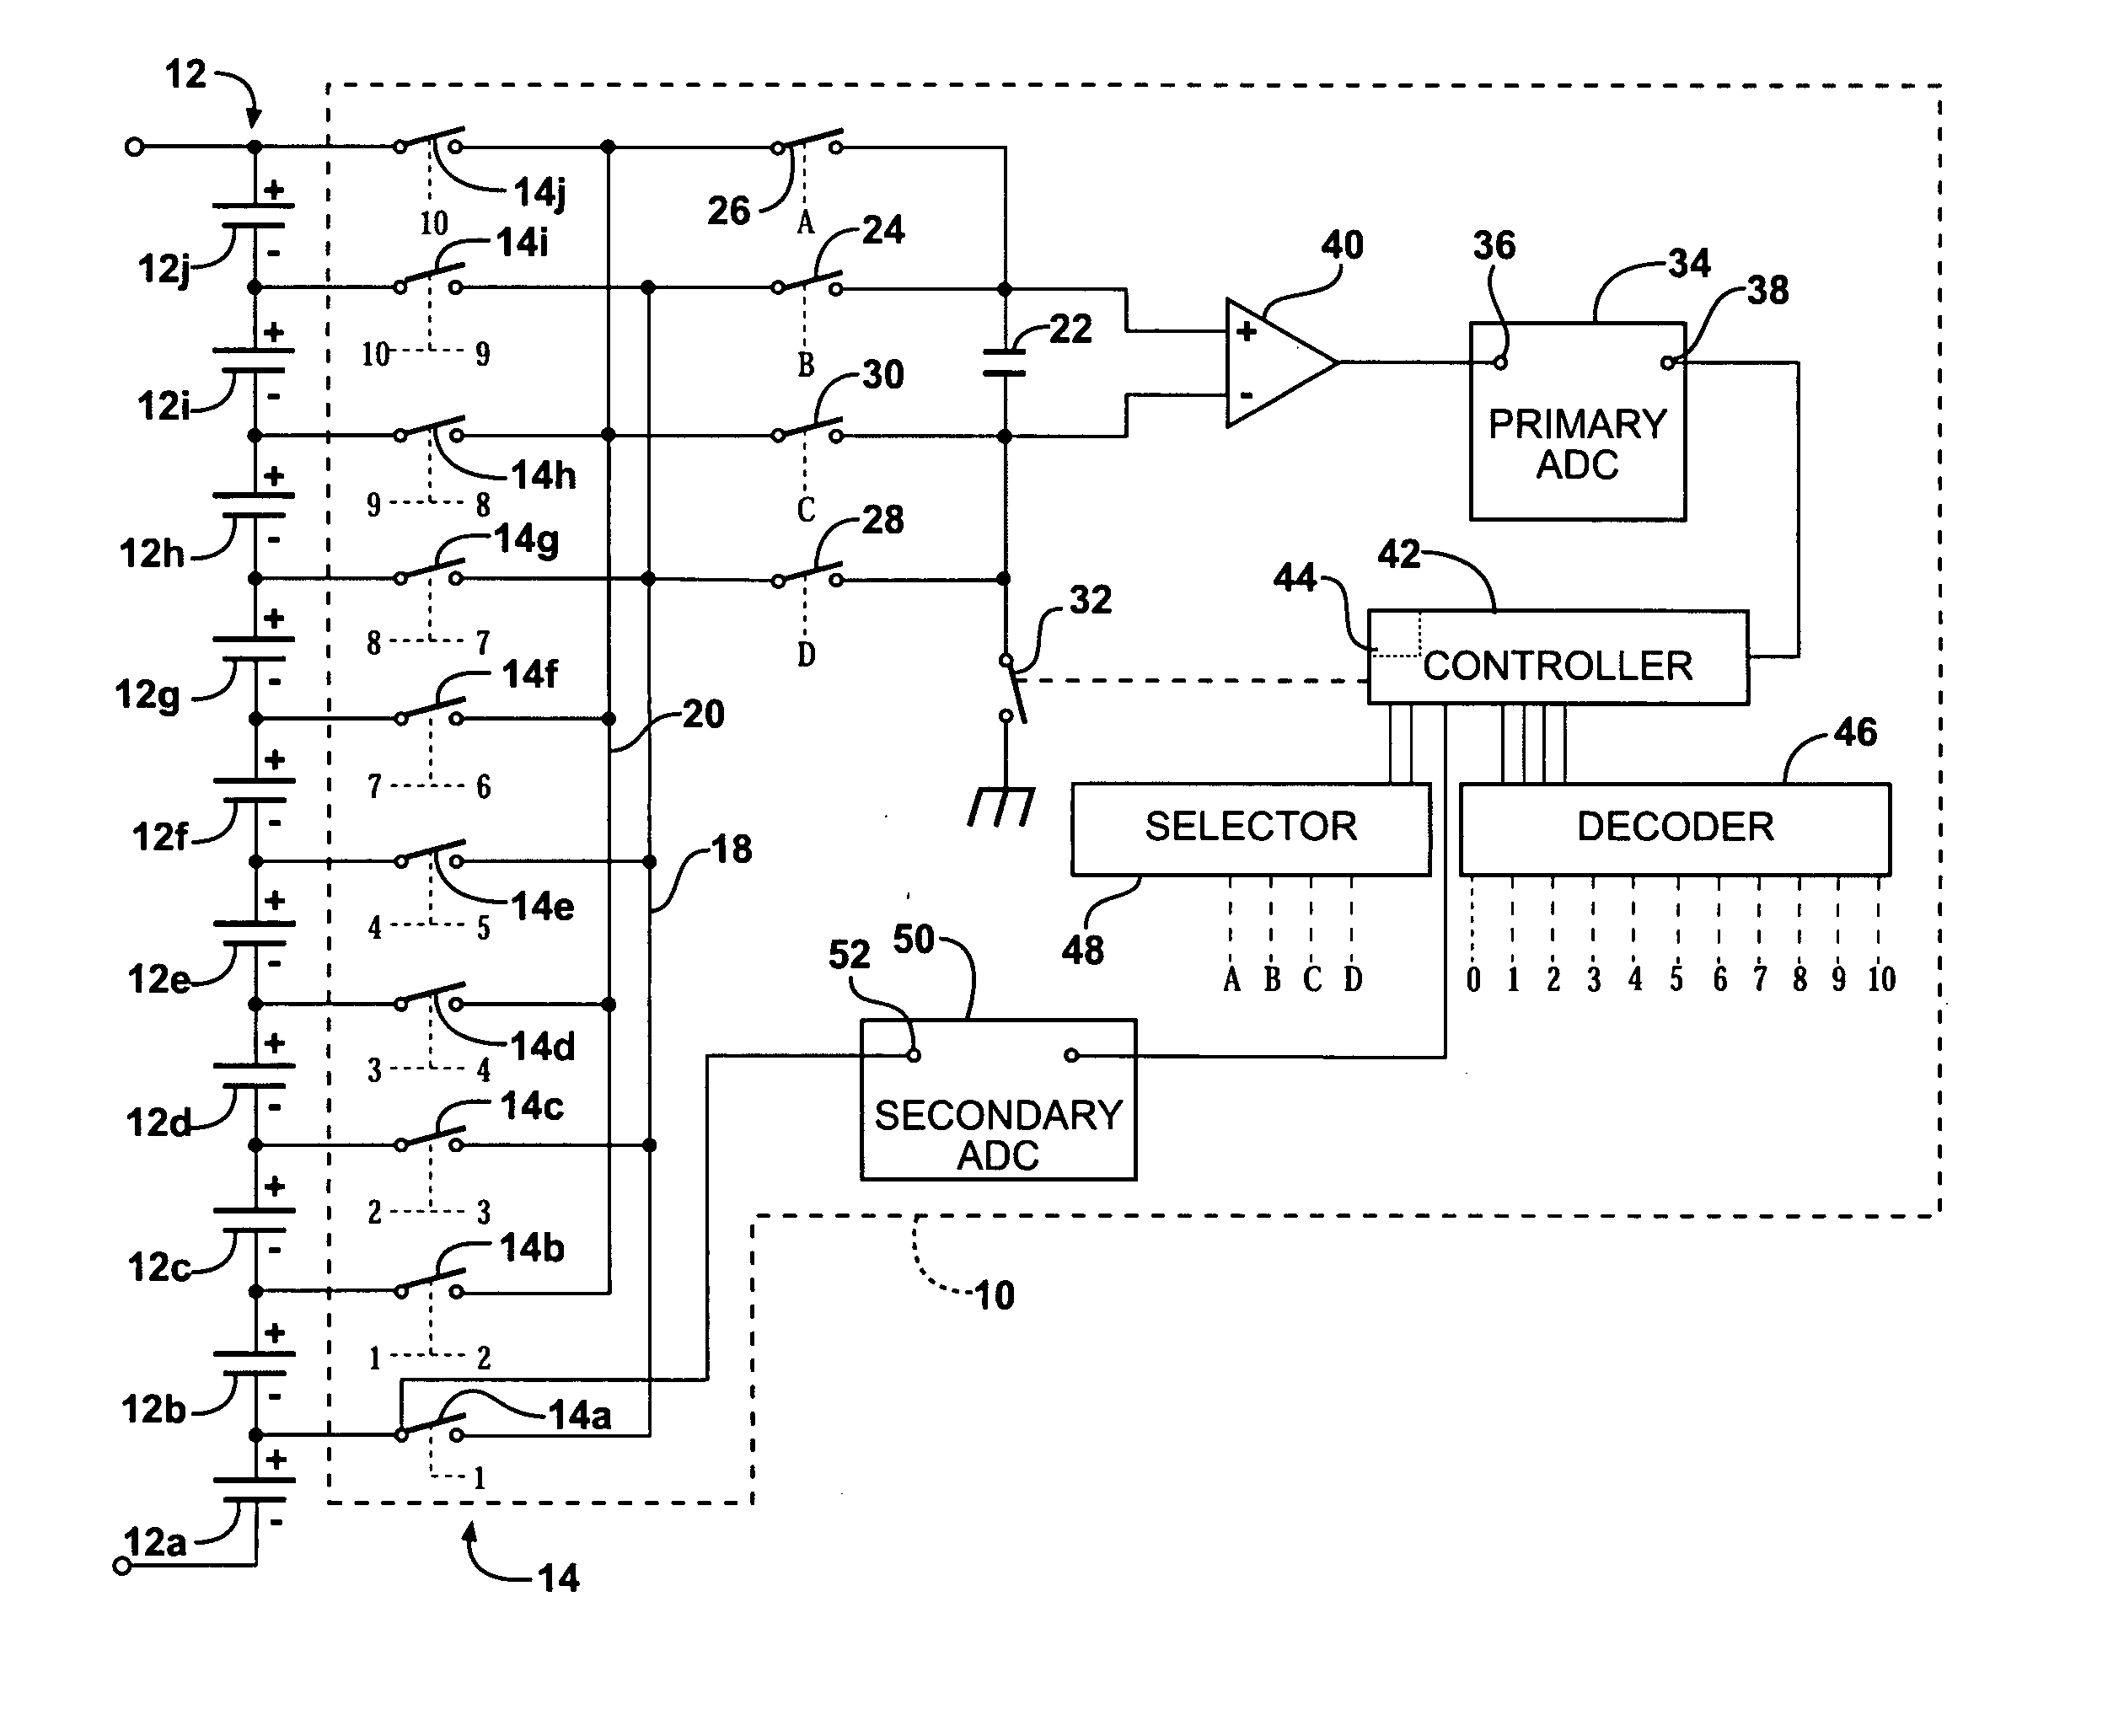 System and Method to Measure Series-Connected Cell Voltages and Verify Measurement Accuracy